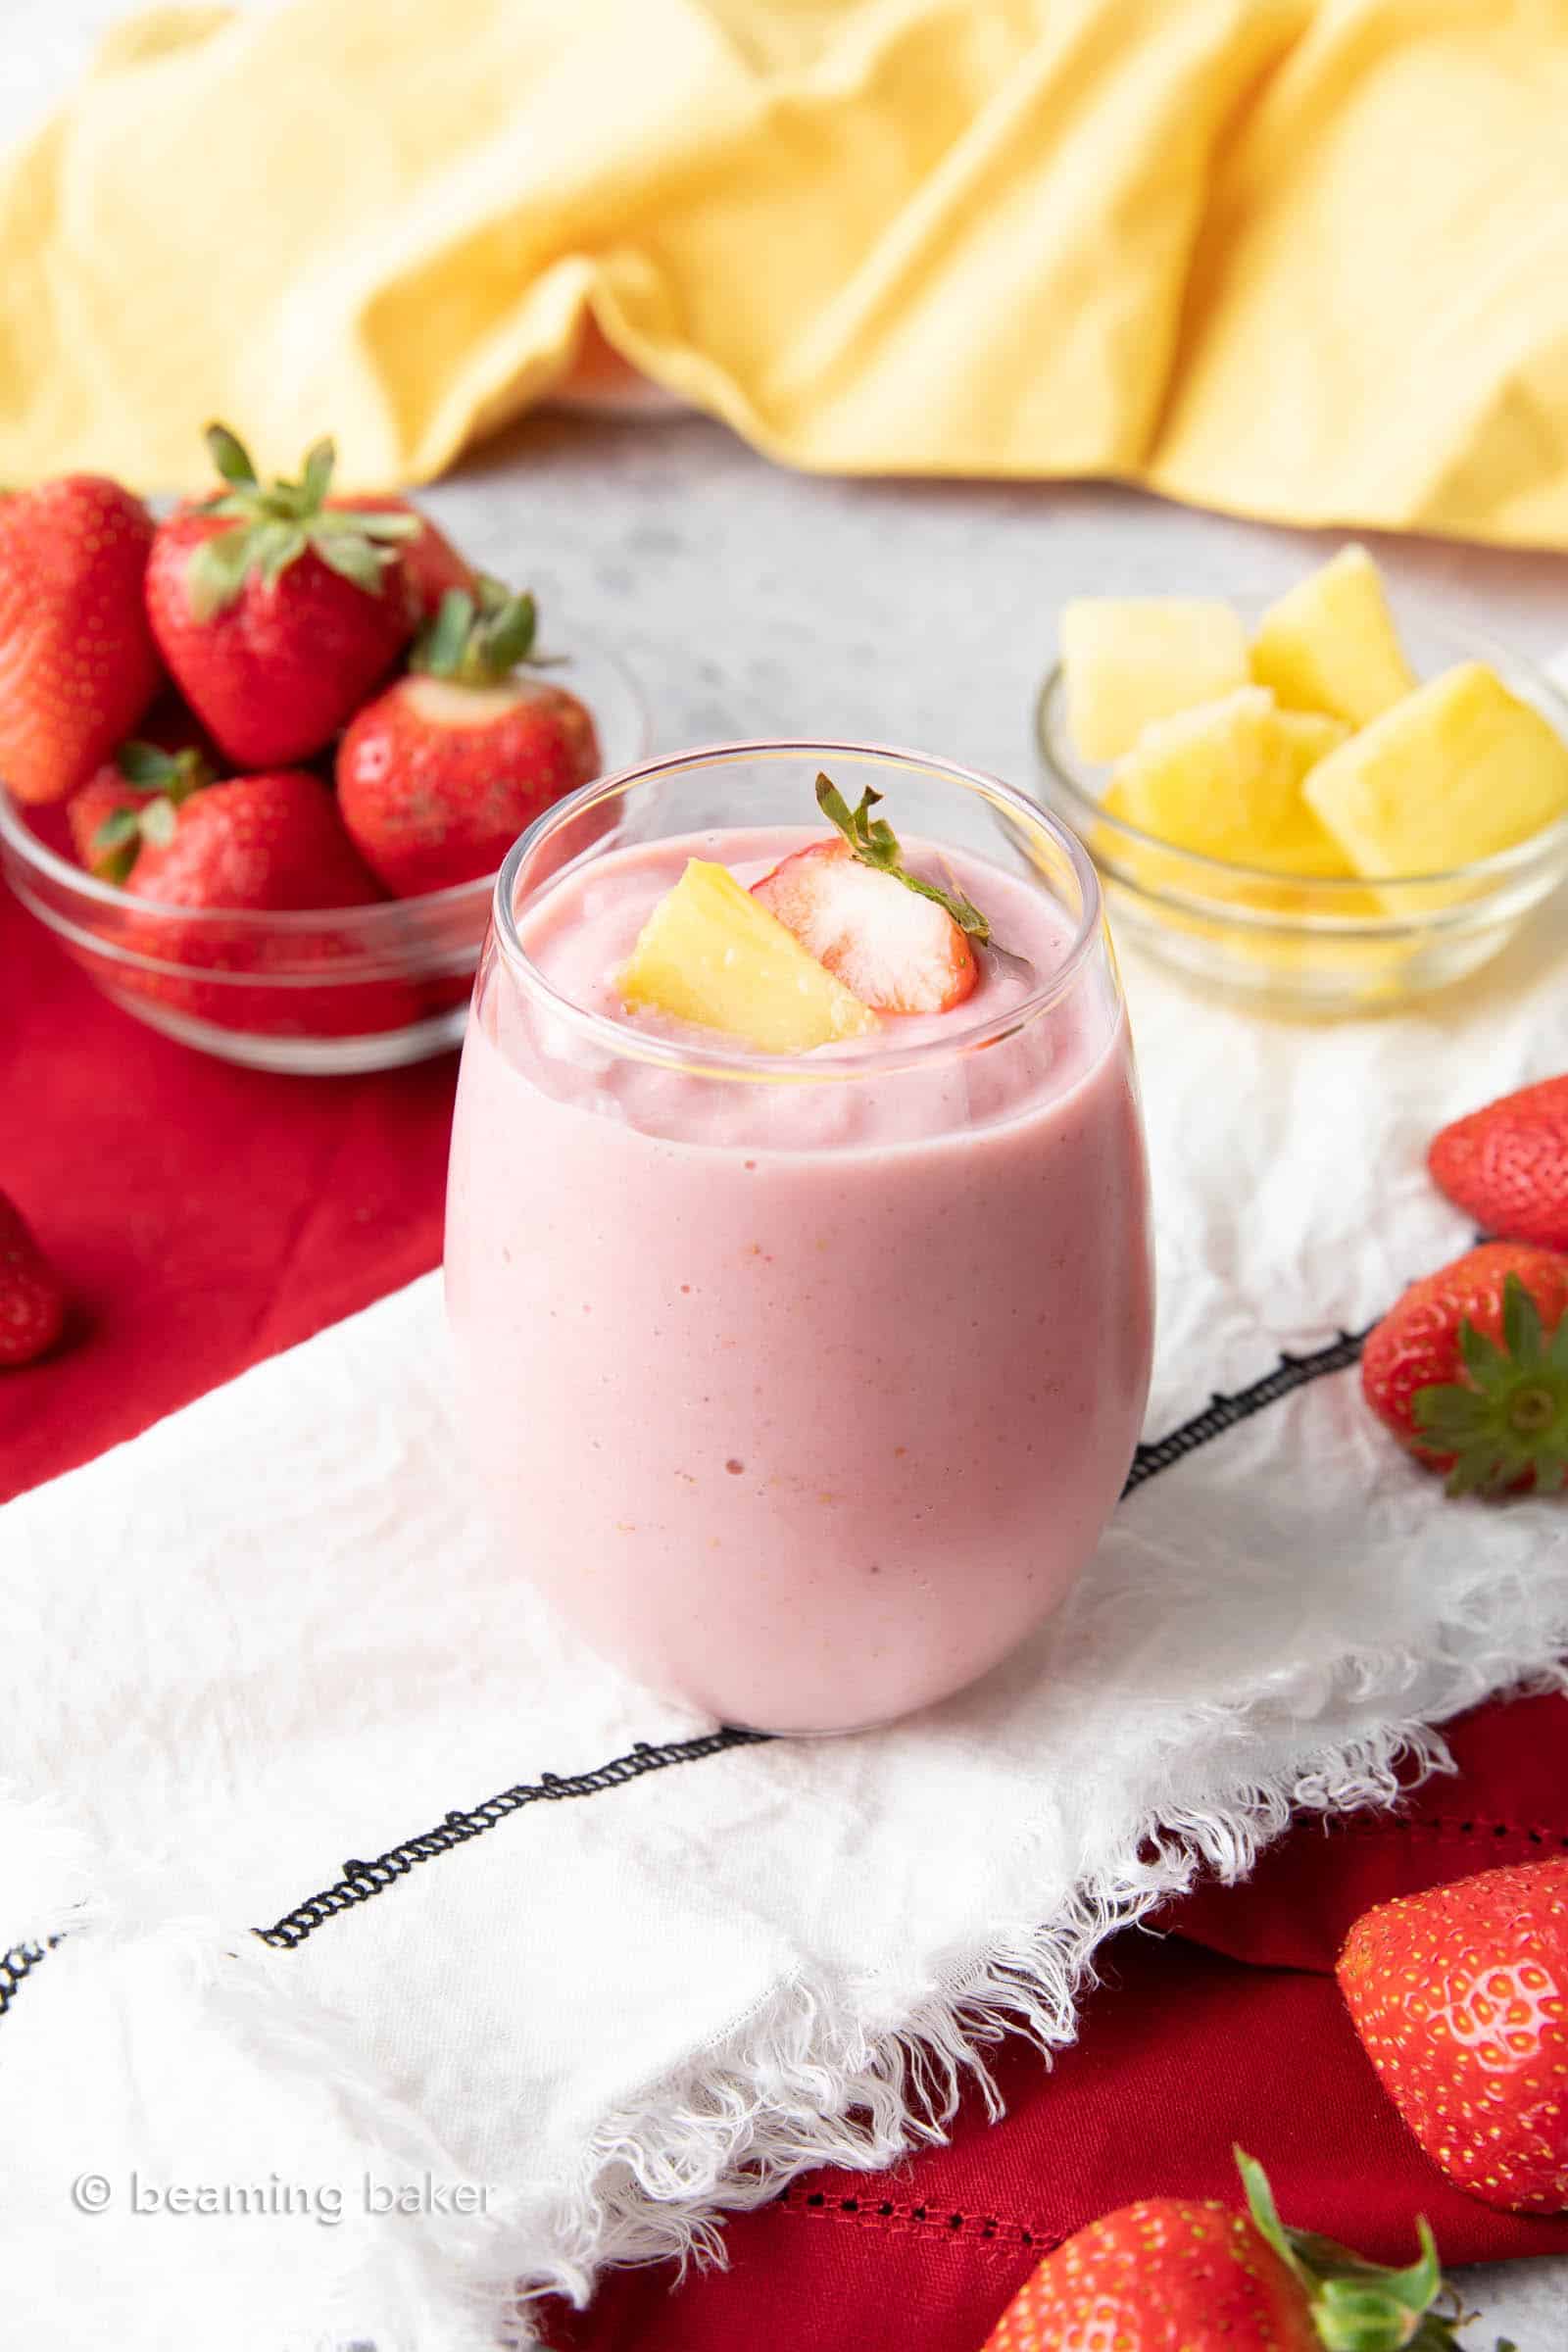 A glass filled with Strawberry Pineapple Smoothie served with fresh strawberries and pineapple chunks